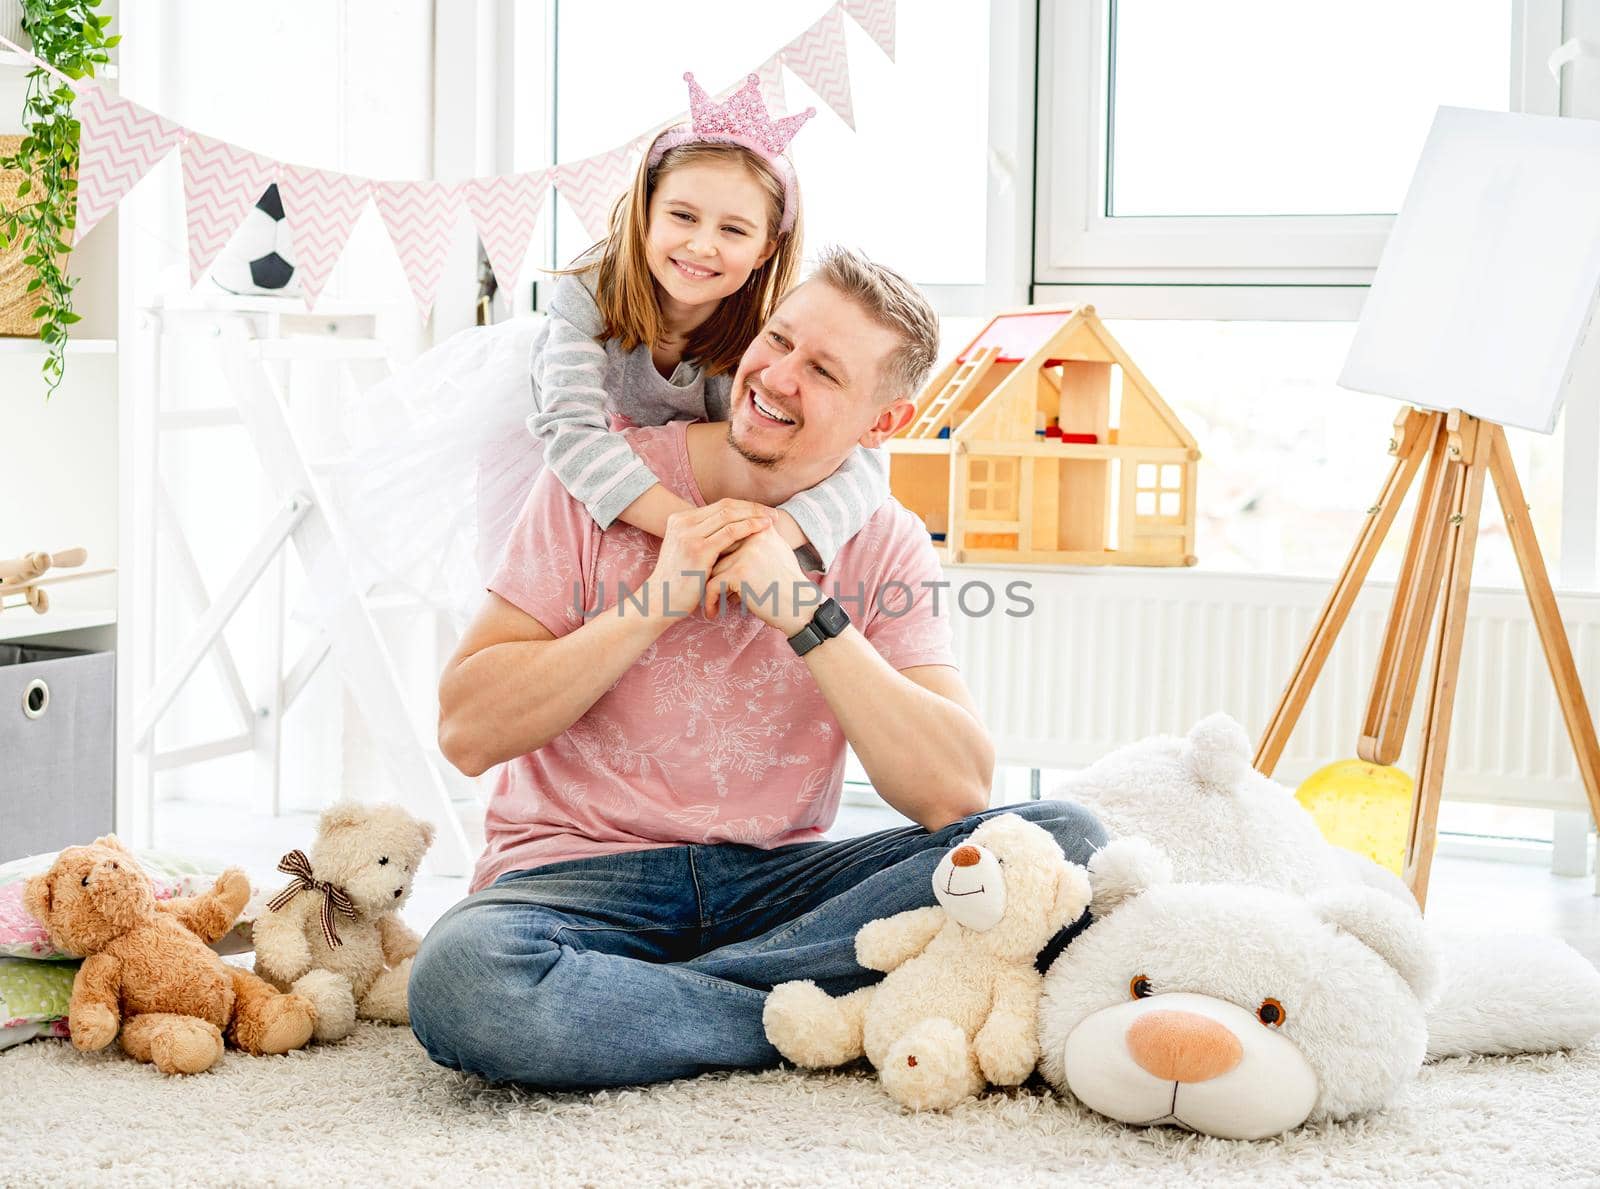 Smiling father and happy daughter spending time together in decorated room